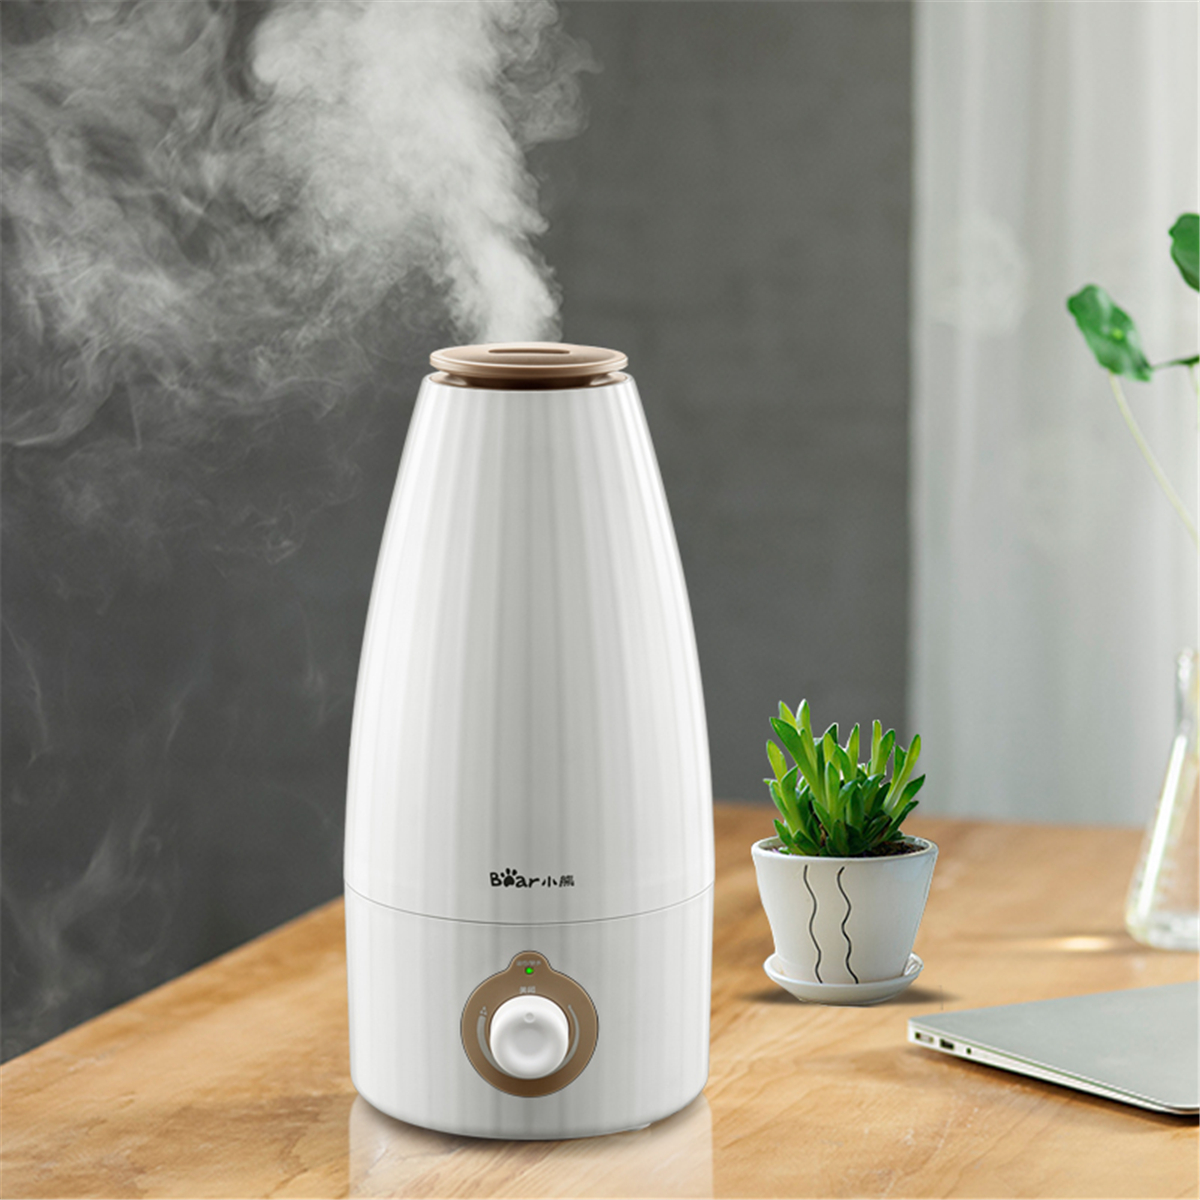 2L-Aroma-Humidifier-Air-Diffuser-Purifier-Quiet-Home-Atomizer-Spa-Aromatherapy-Large-Capacity-1206819